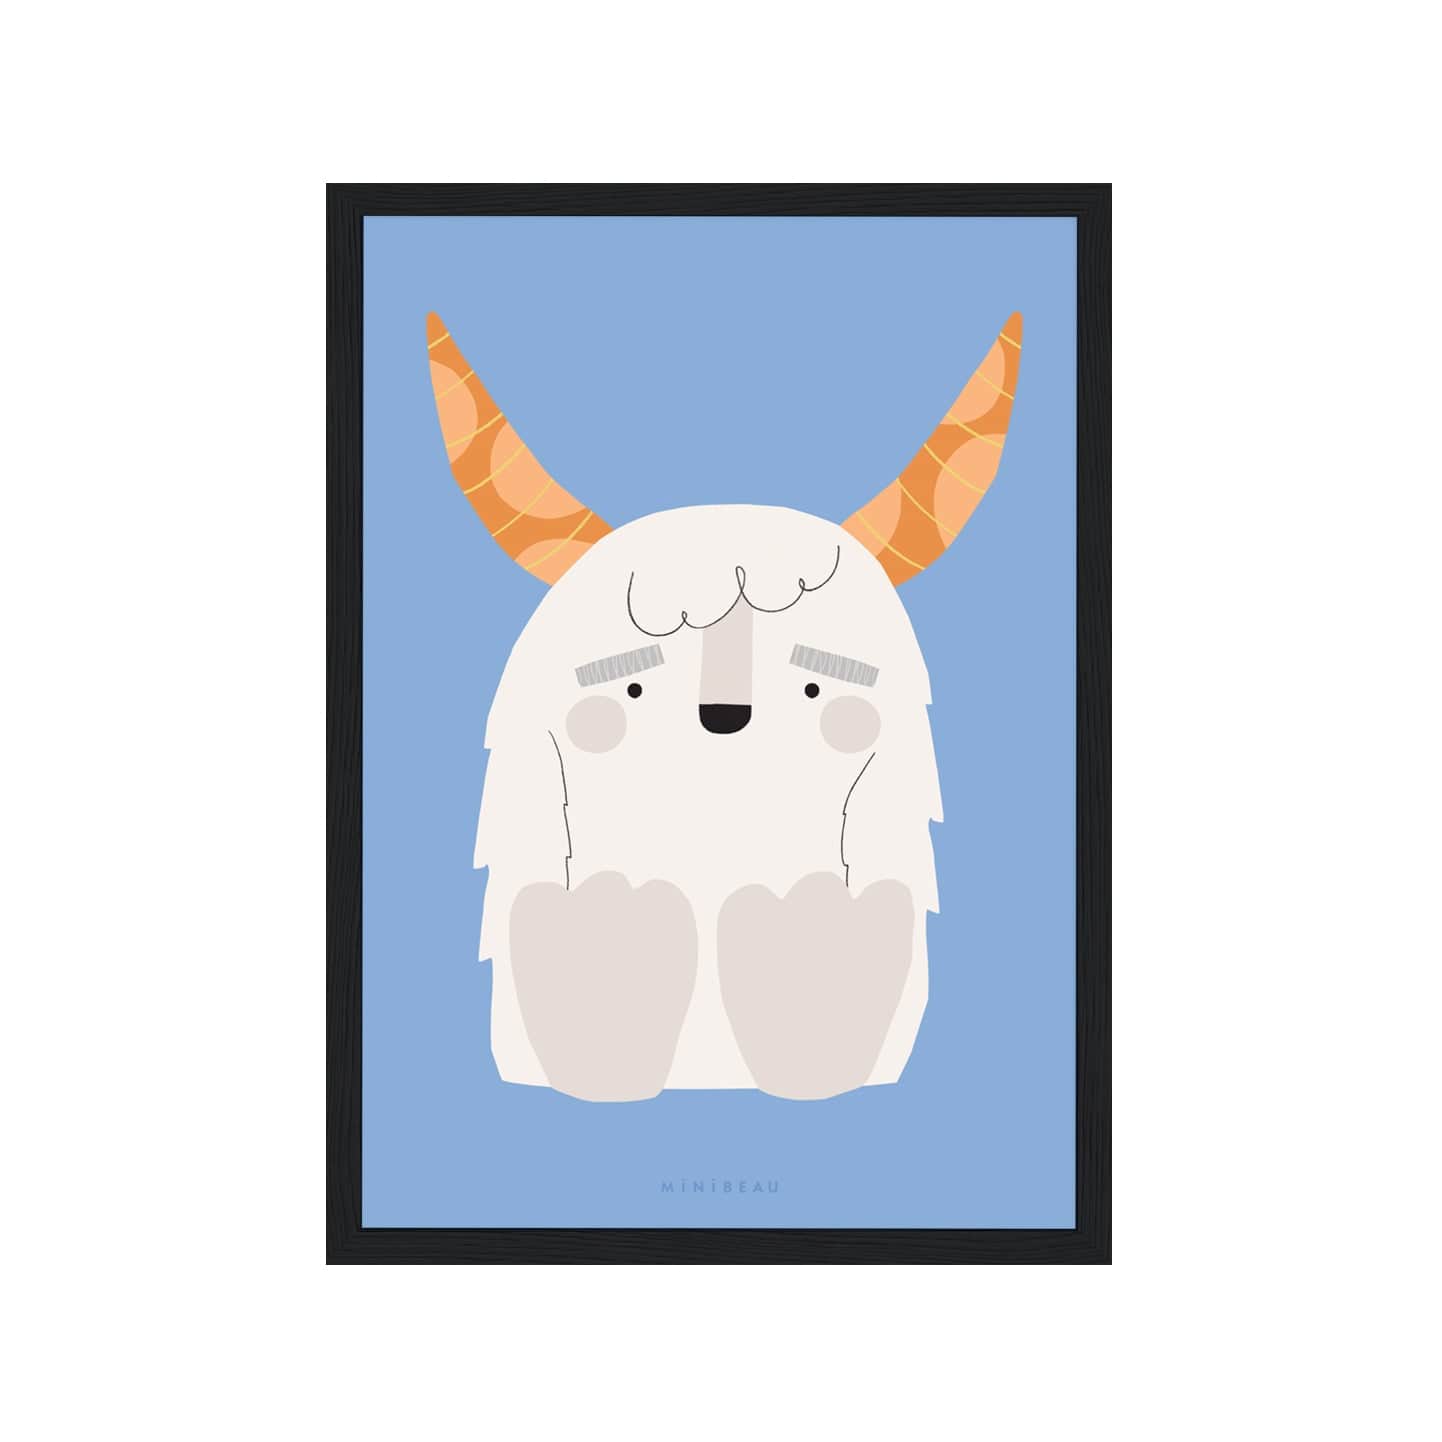 Art print in a black frame. Our Happy Alphabet 'Y' Art Print shows a smiling white Yeti, with big brown horns, sitting to create a Y shape, on a light blue background.